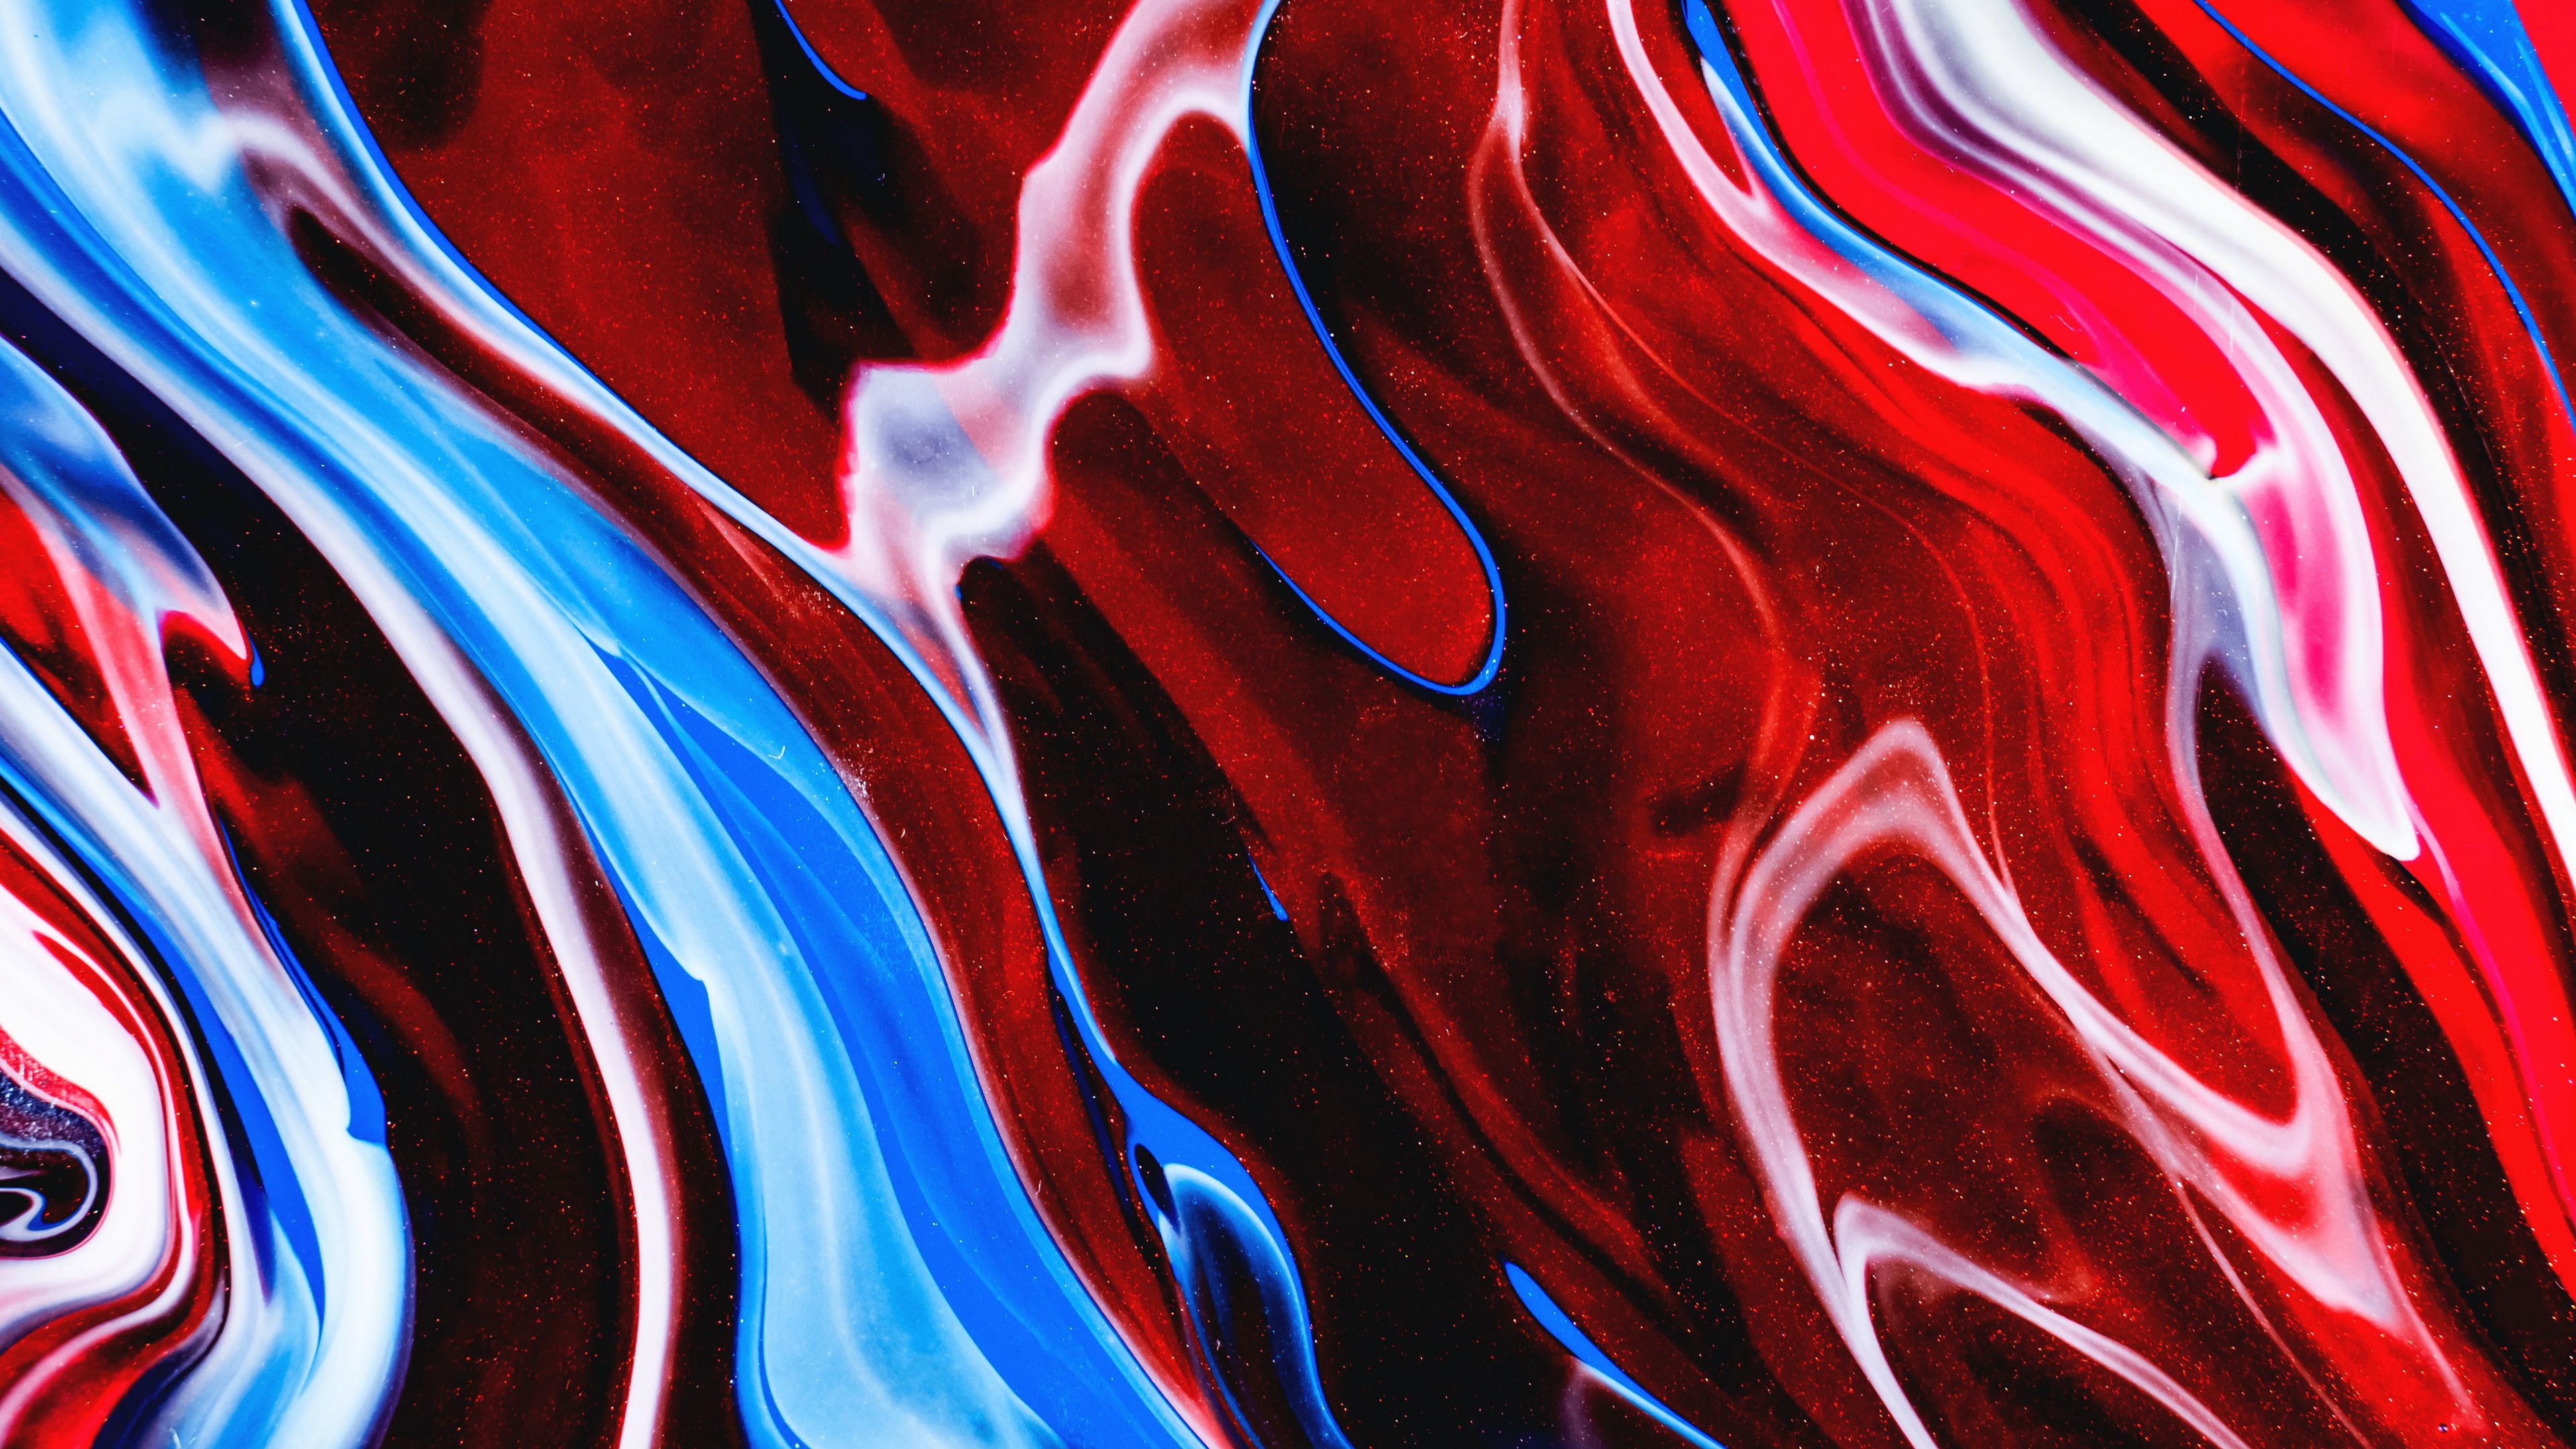 Download wallpaper 3840x2160 paint, colorful, liquid, abstraction, fluid  art, distortion 4k uhd 16:9 hd background